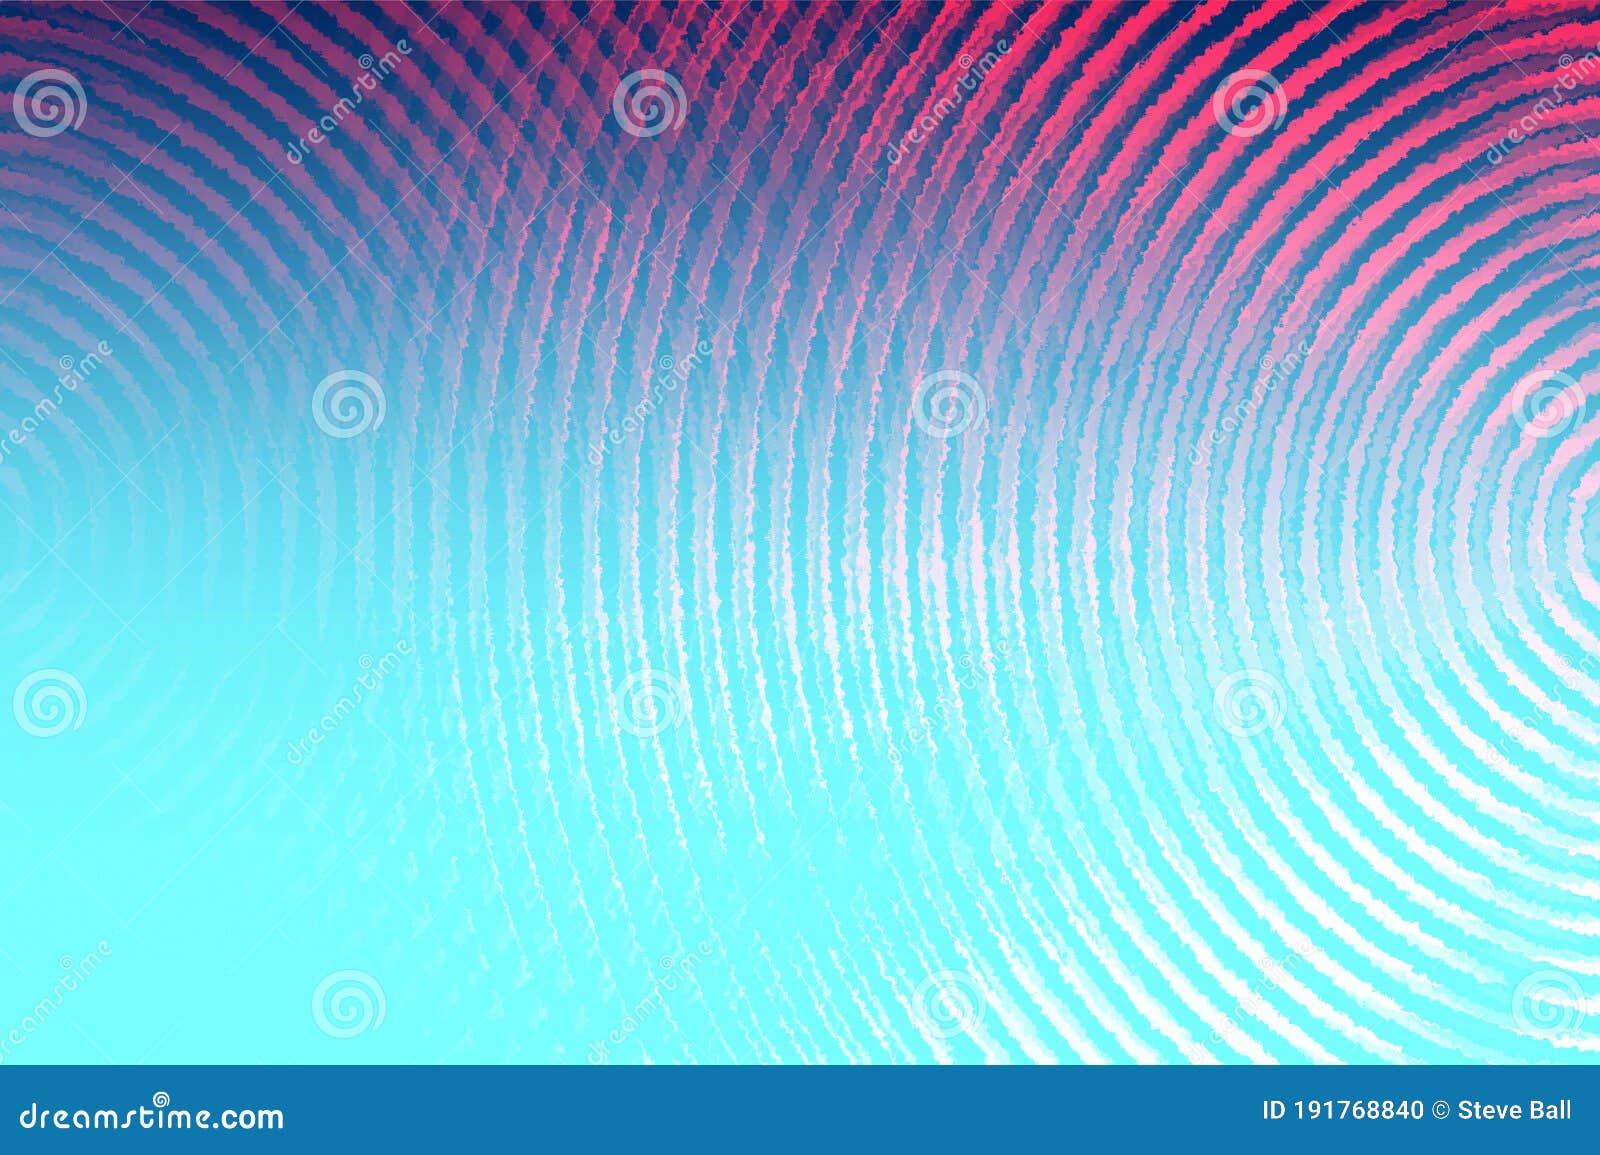 Red and Blue Sound Stock Photo - of wave, power: 191768840